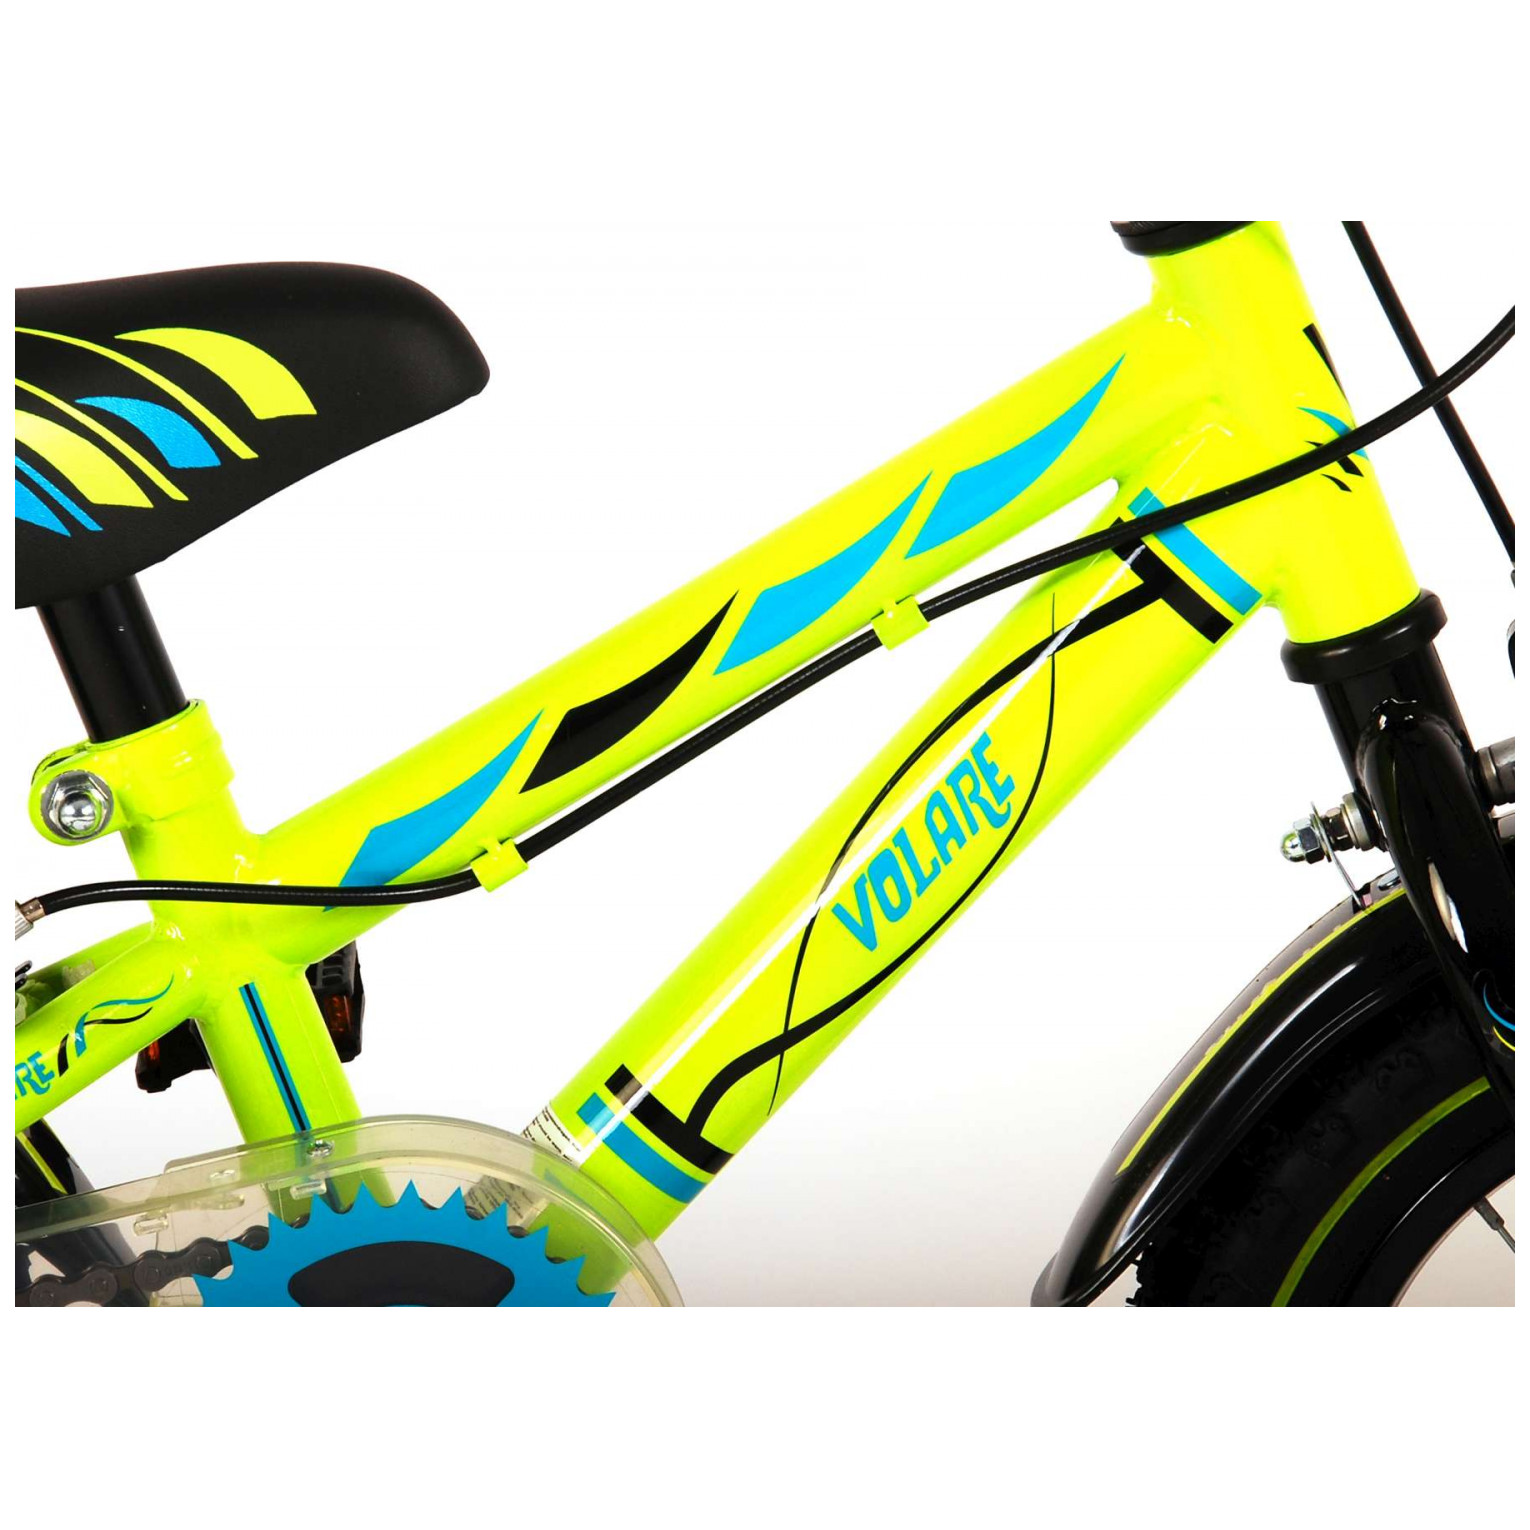 Volare Electric Green Fiets - 12